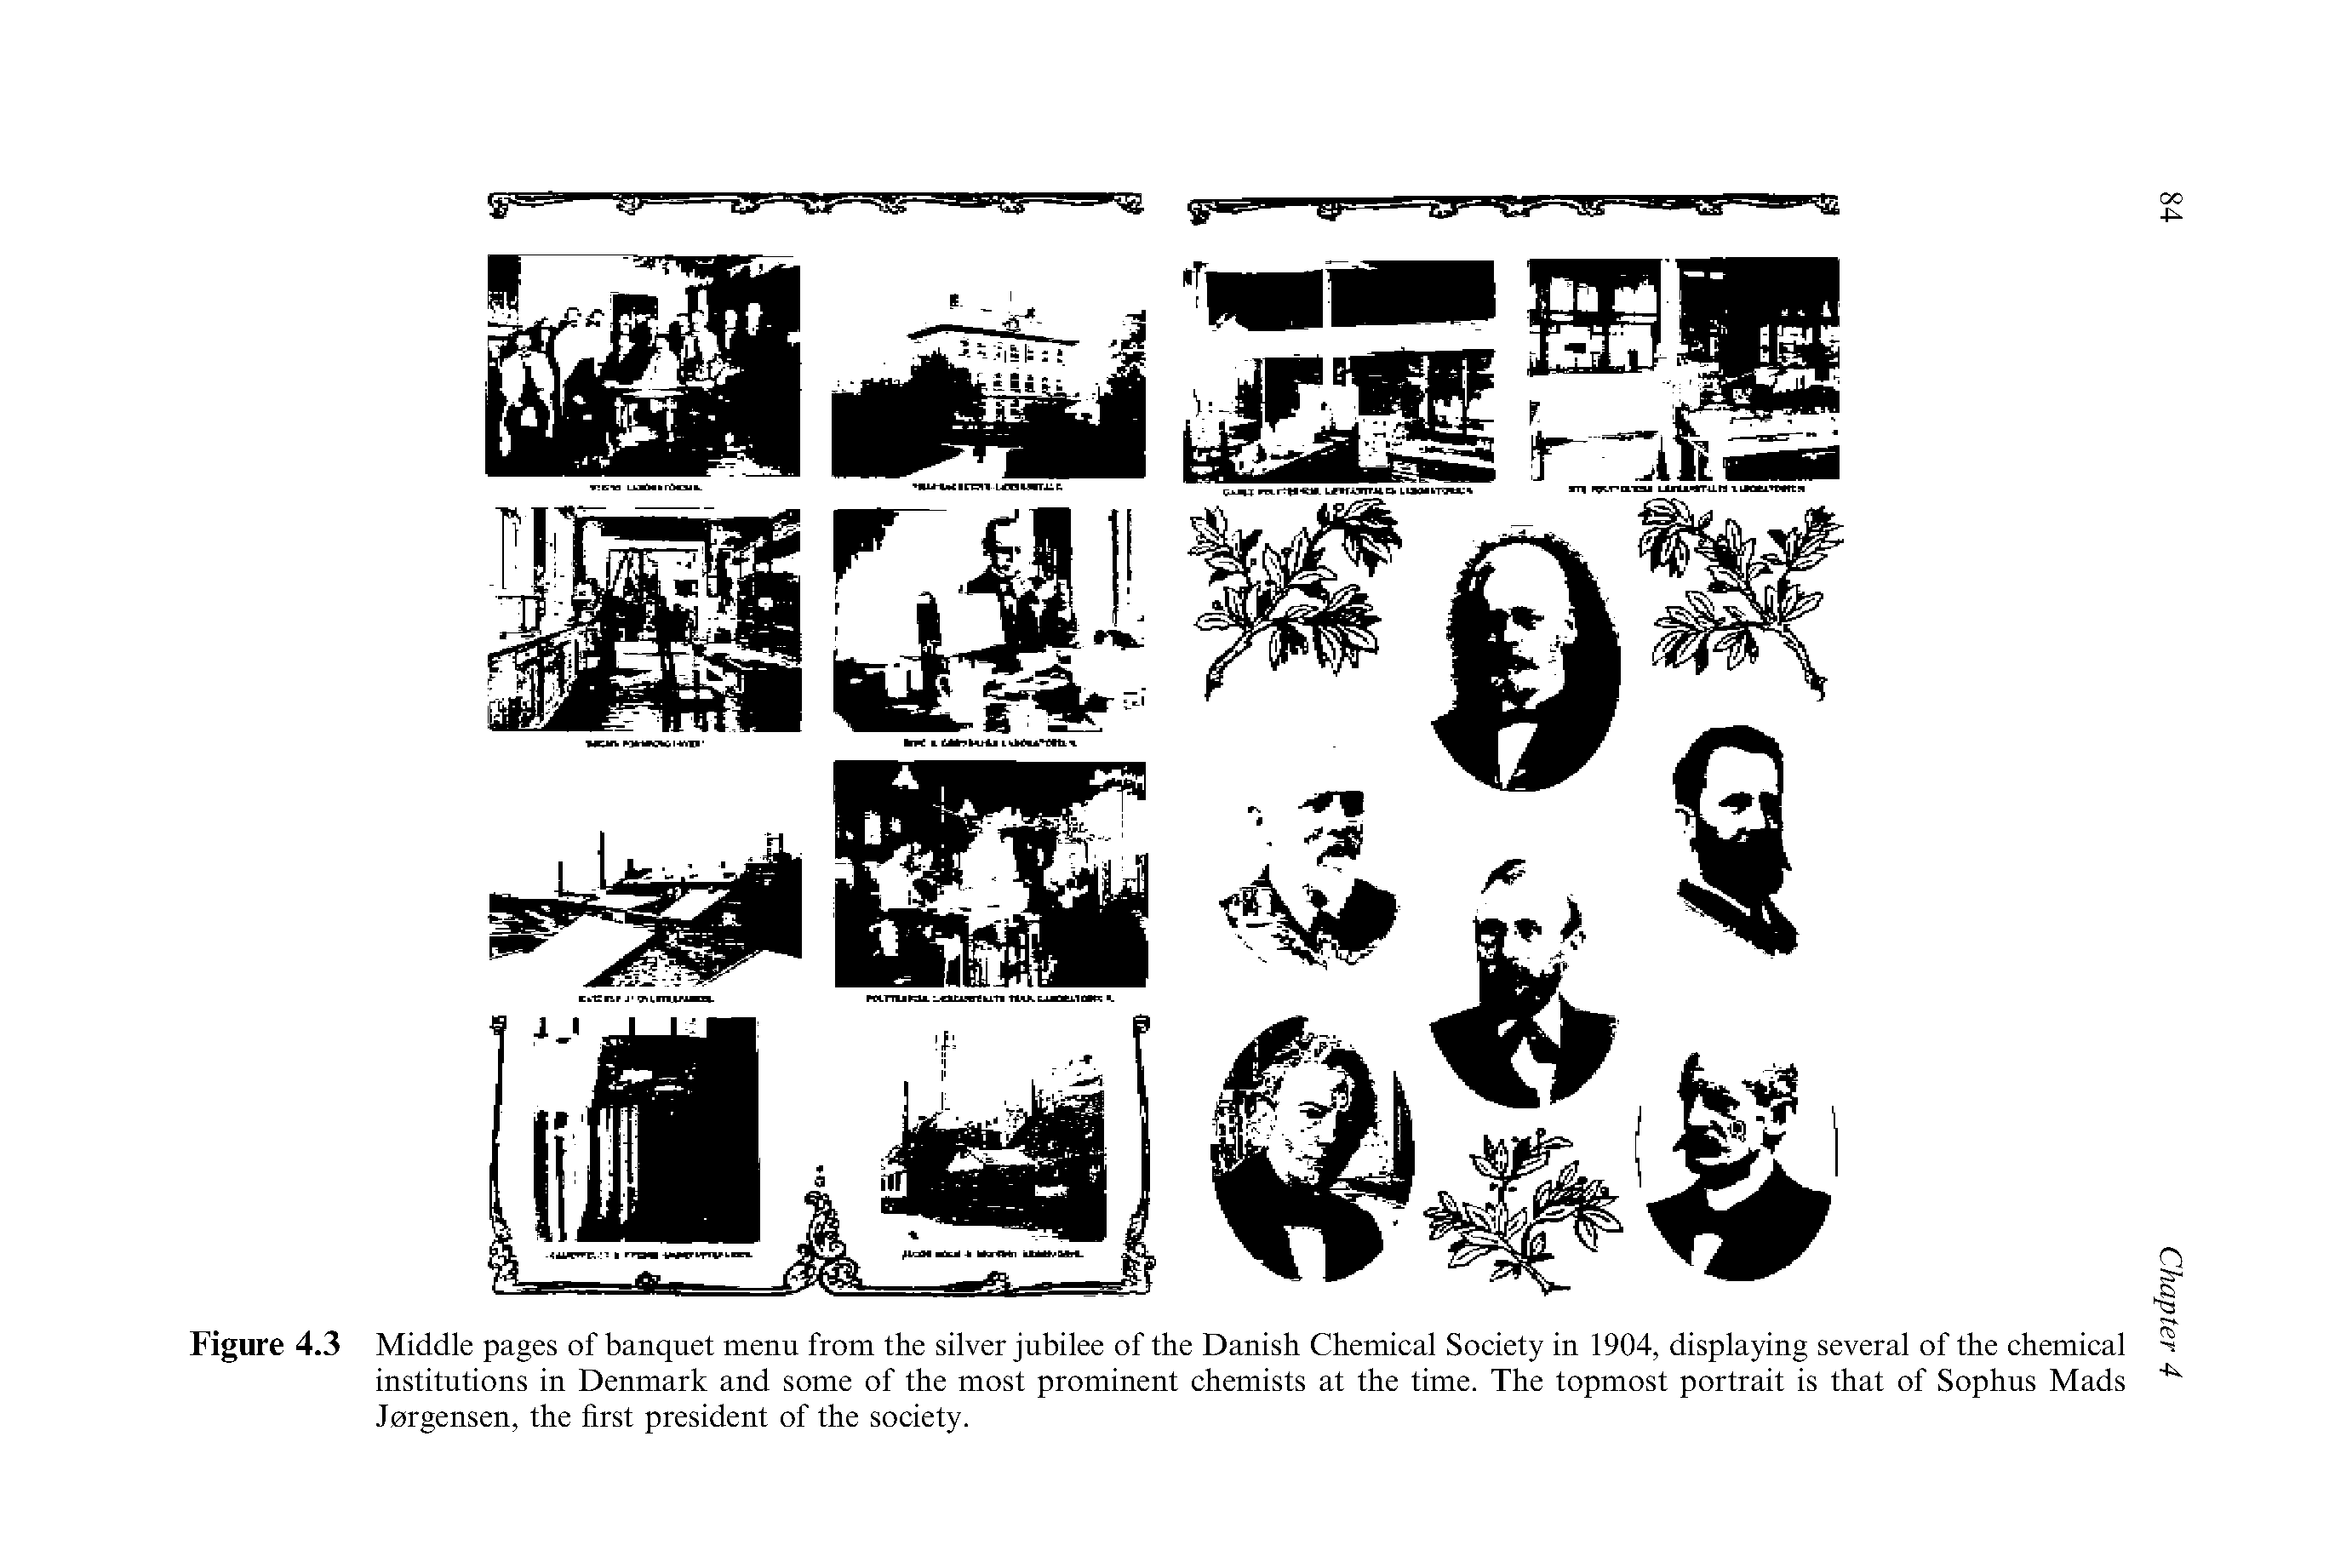 Figure 4.3 Middle pages of banquet menu from the silver jubilee of the Danish Chemical Society in 1904, displaying several of the chemical institutions in Denmark and some of the most prominent chemists at the time. The topmost portrait is that of Sophus Mads Jorgensen, the first president of the society.